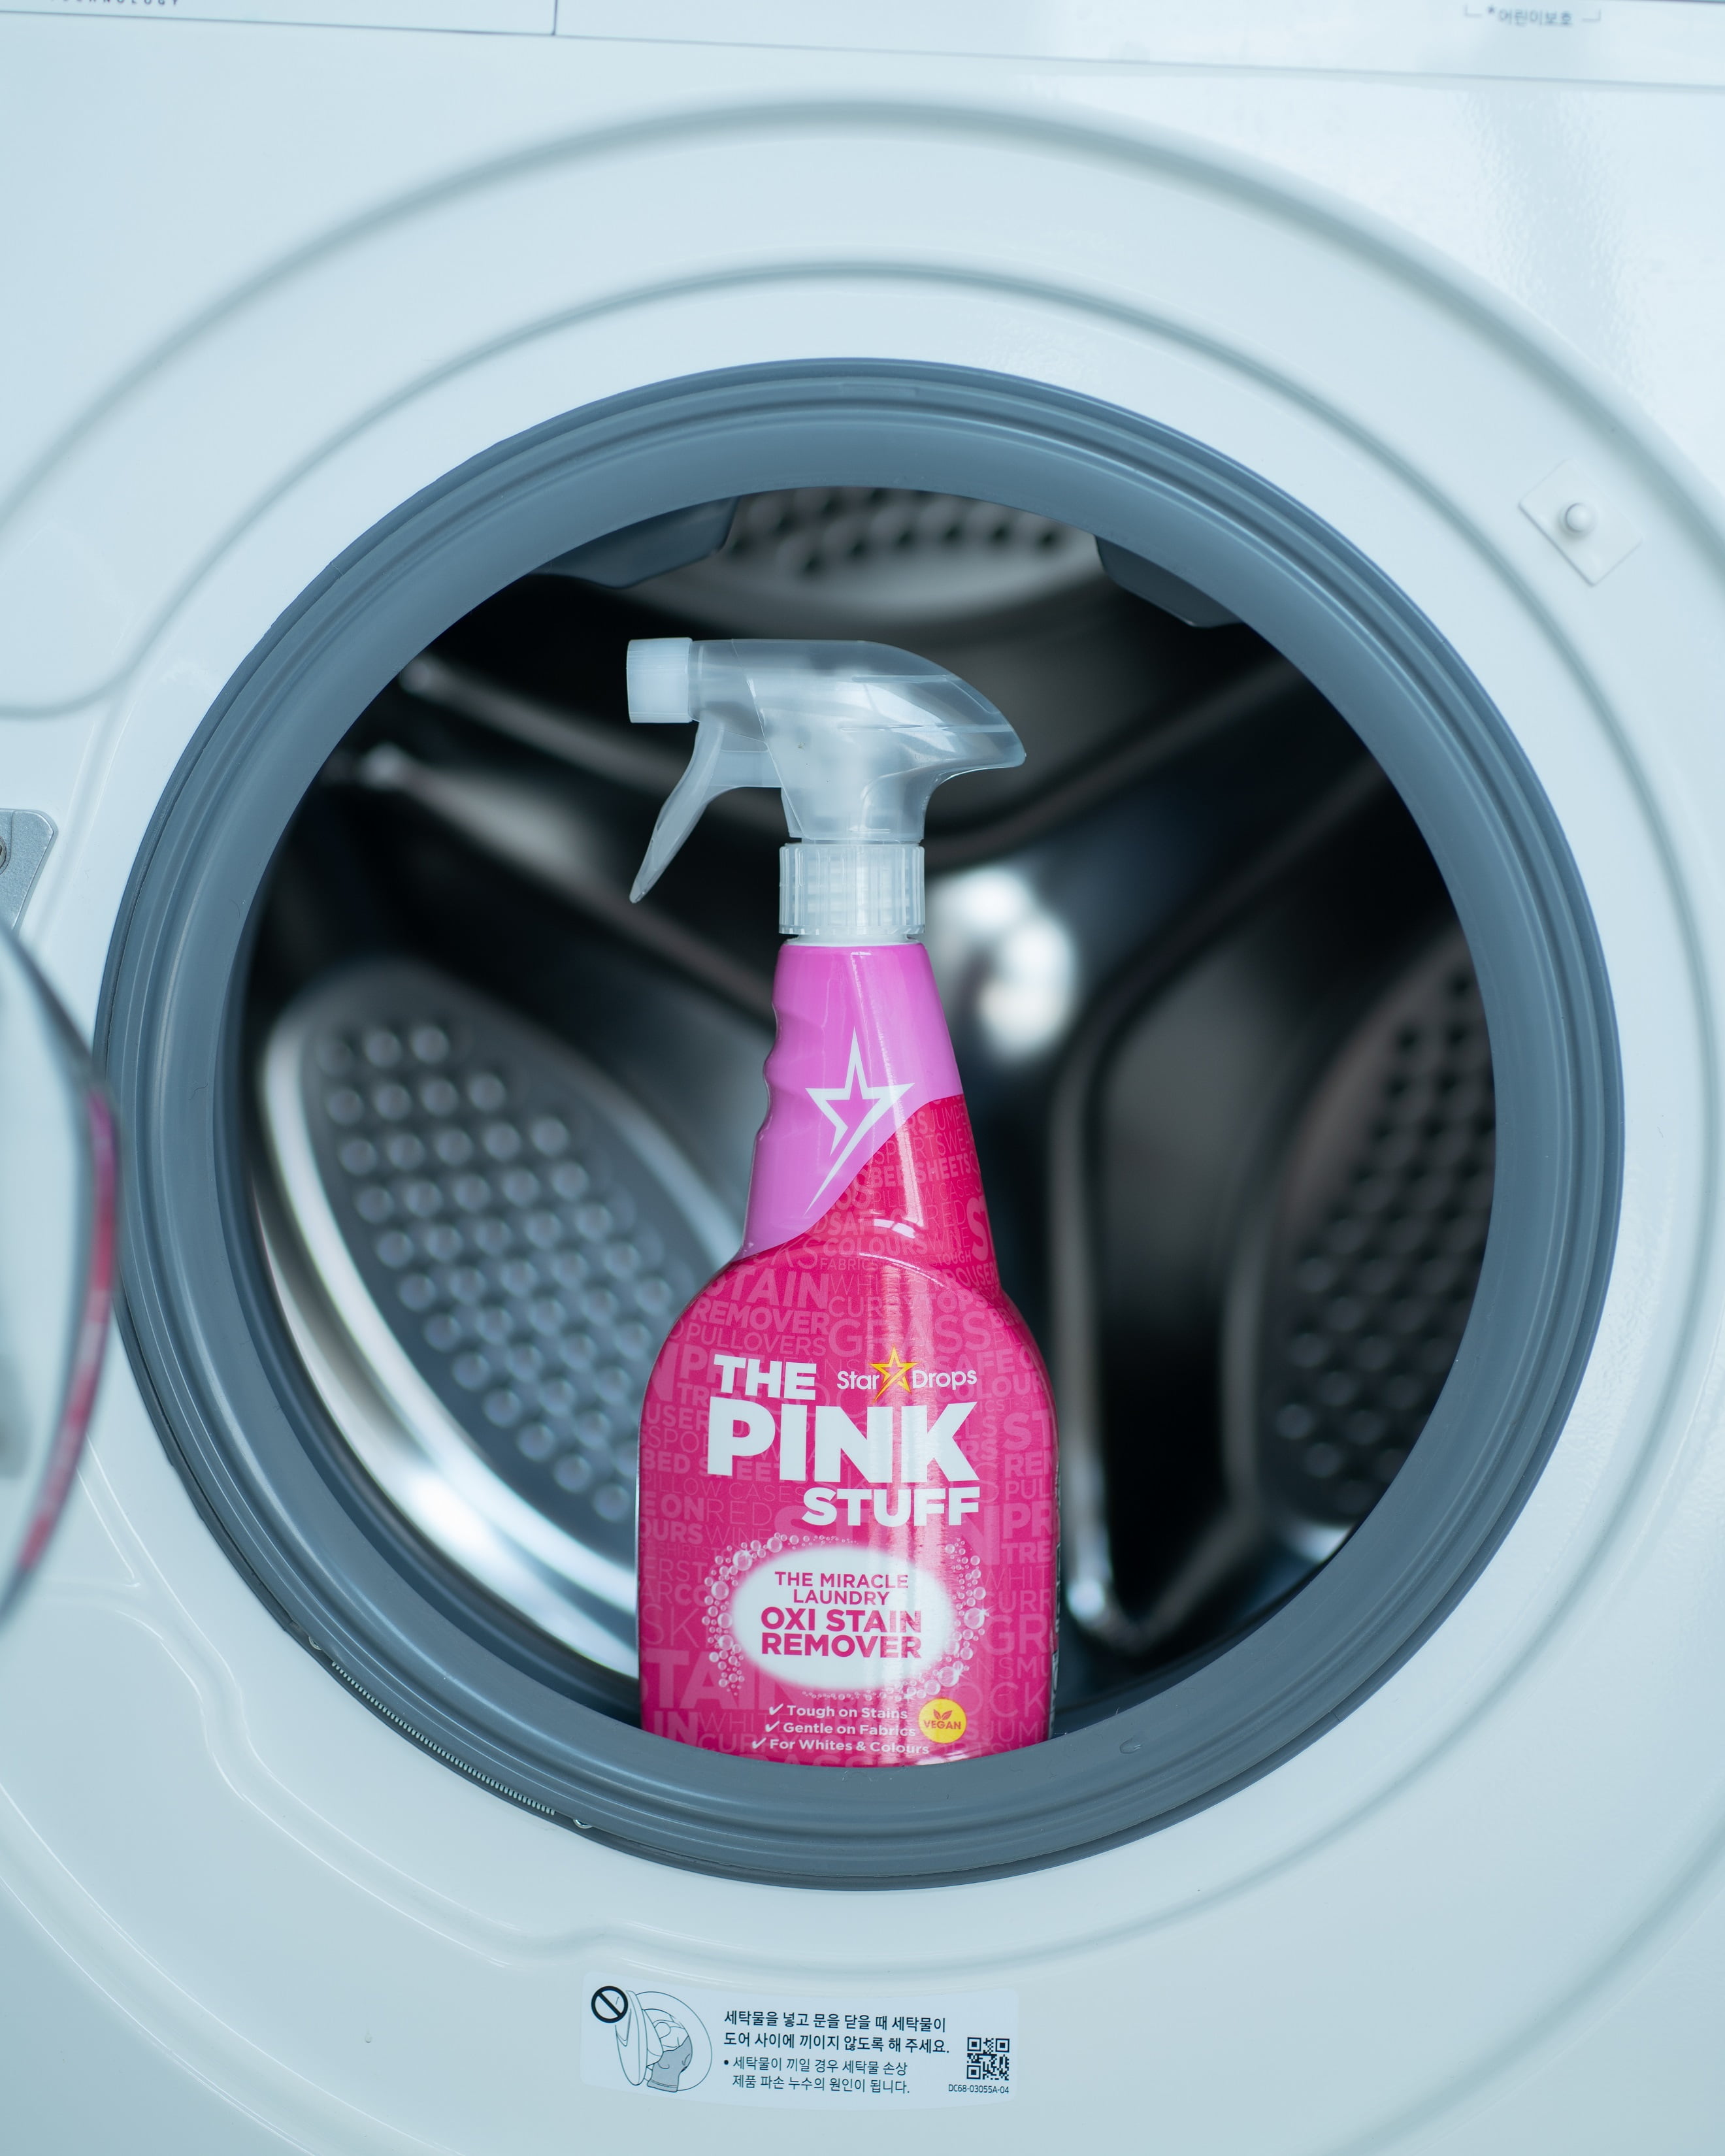 want your clothes to look new? Using The Pink Stuff The Miracle Oxi Po, The  Pink Stuff